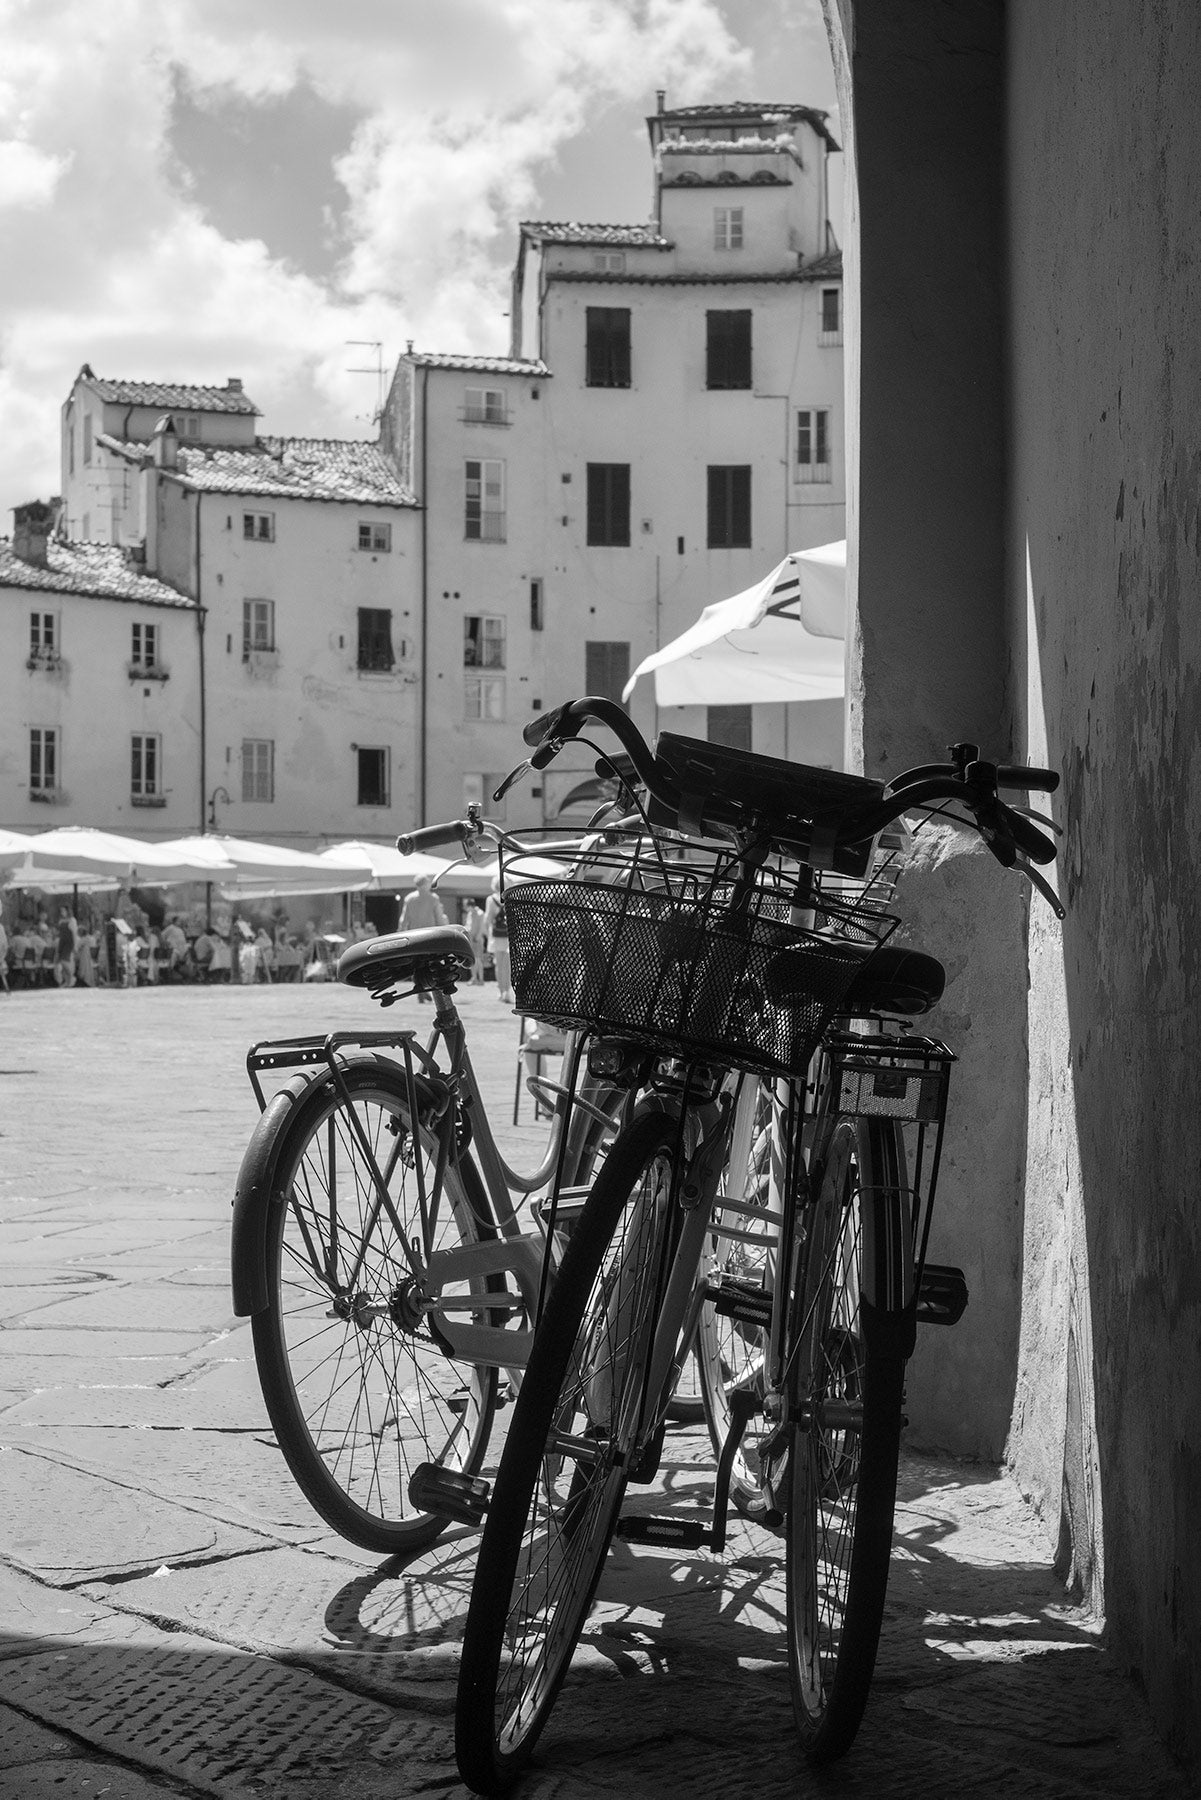 Black and White image looking past three bicycles leant against a wall into Piazza dell'Anfiteatro, the oval shaped piazza in Lucca, Italy.